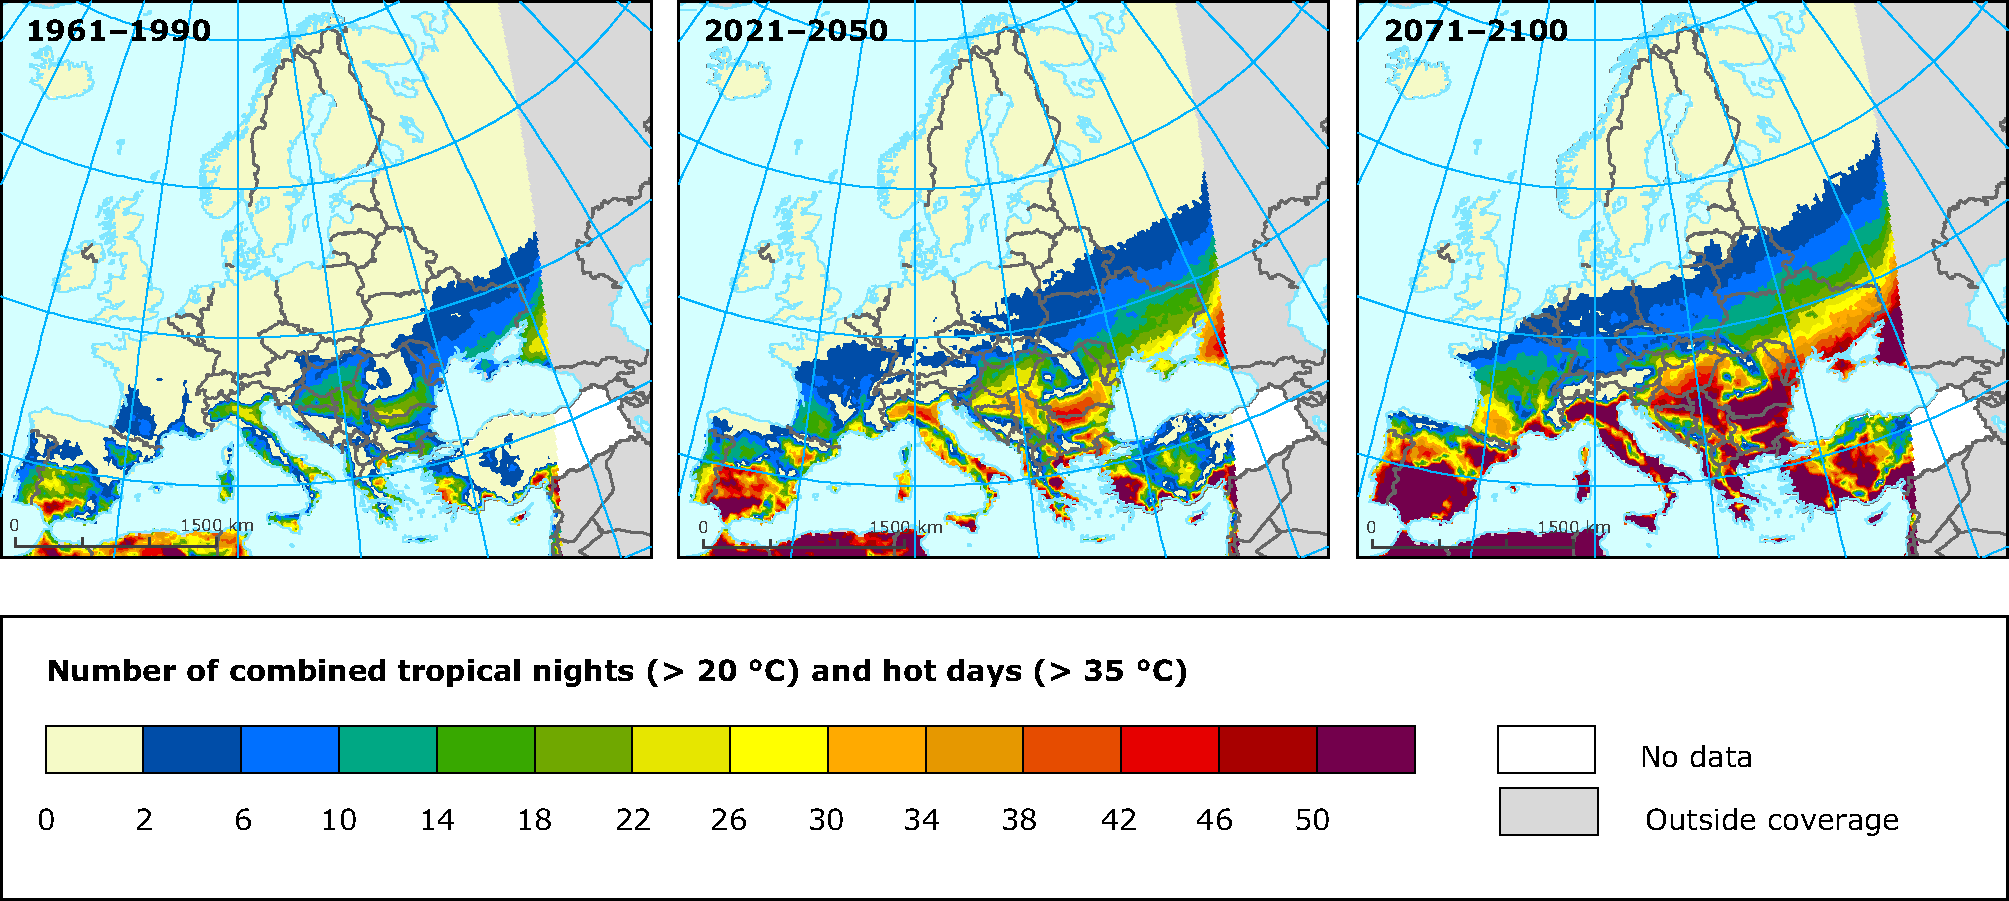 Projections of extreme temperatures as represented by the combined number of hot summer (June-August) days (TMAX>35°C) and tropical nights (TMIN>20°C)